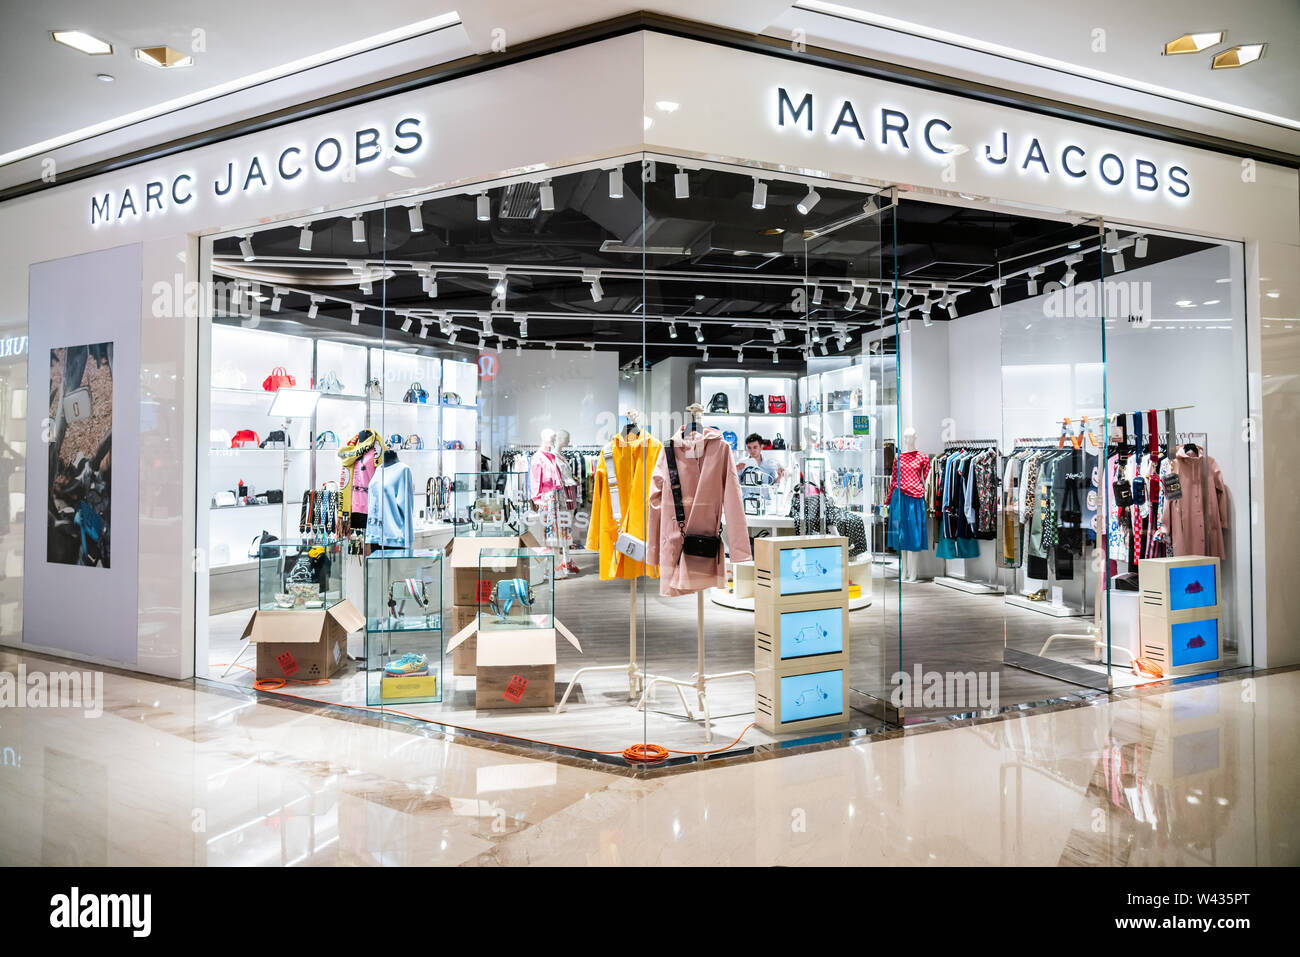 Marc Jacobs Store Stock Photos & Marc Jacobs Store Stock Images ...